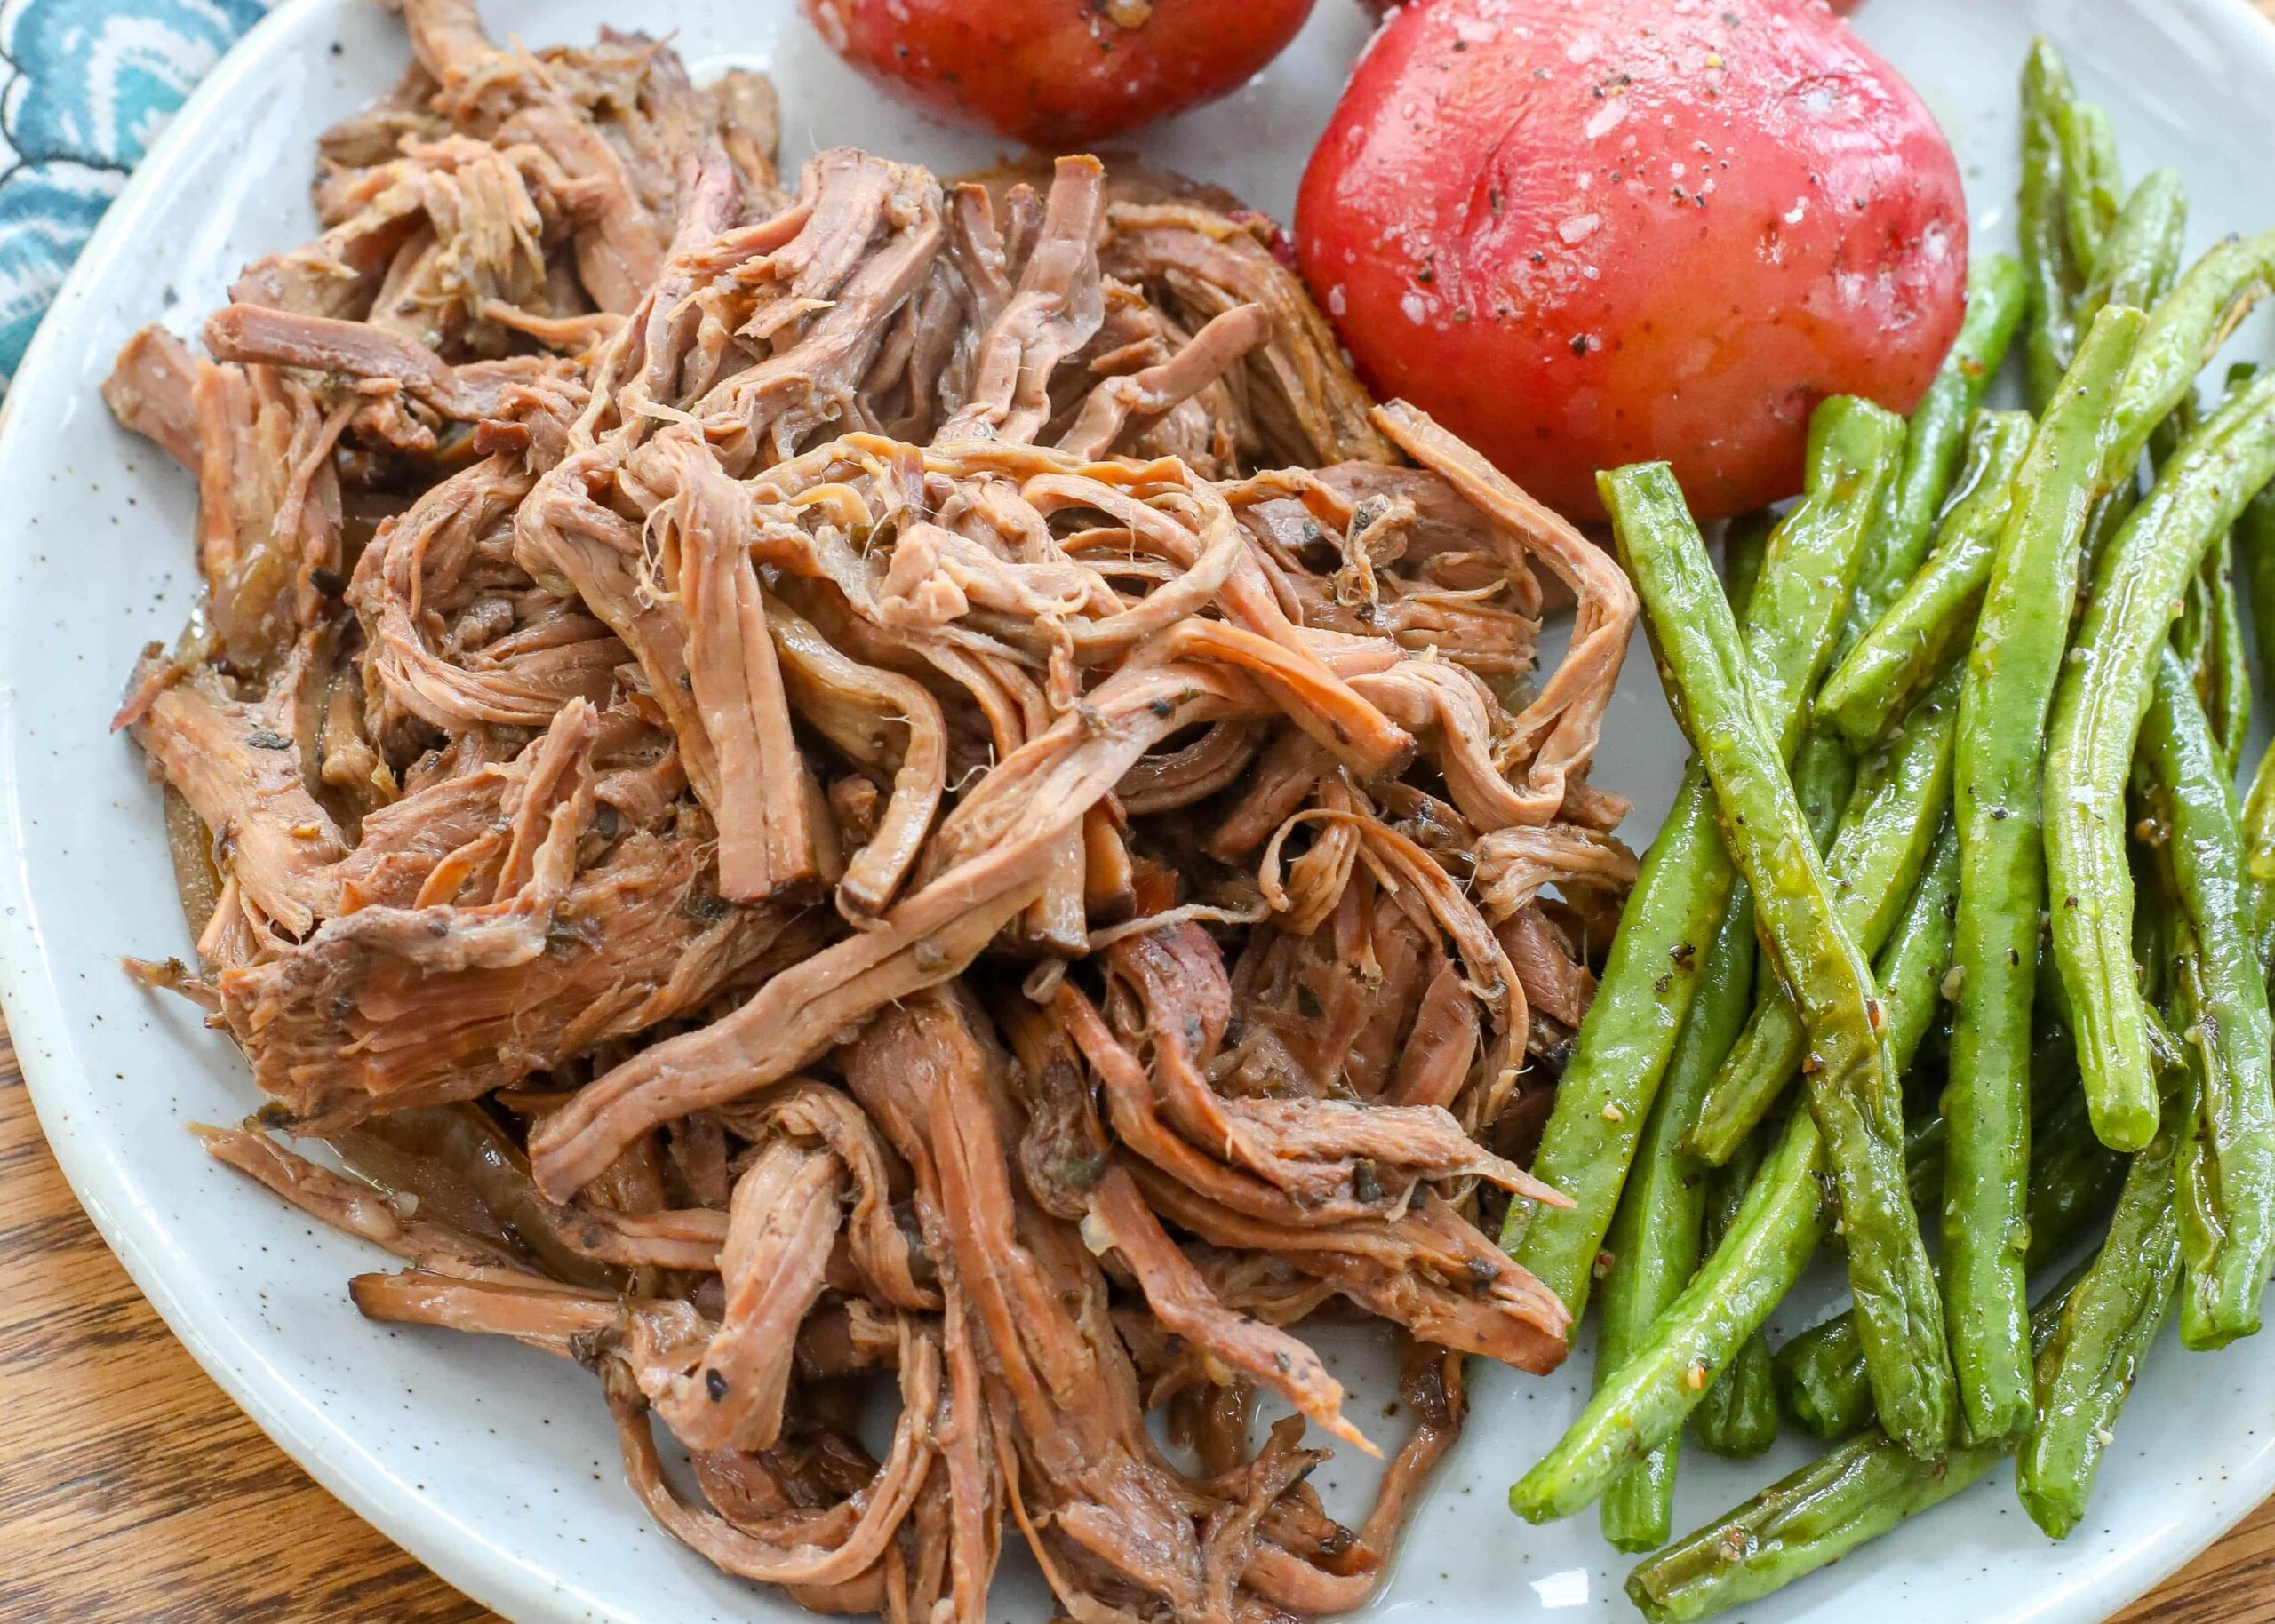  Satisfy your cravings with this mouthwatering slow cooker Italian red wine roast beef!